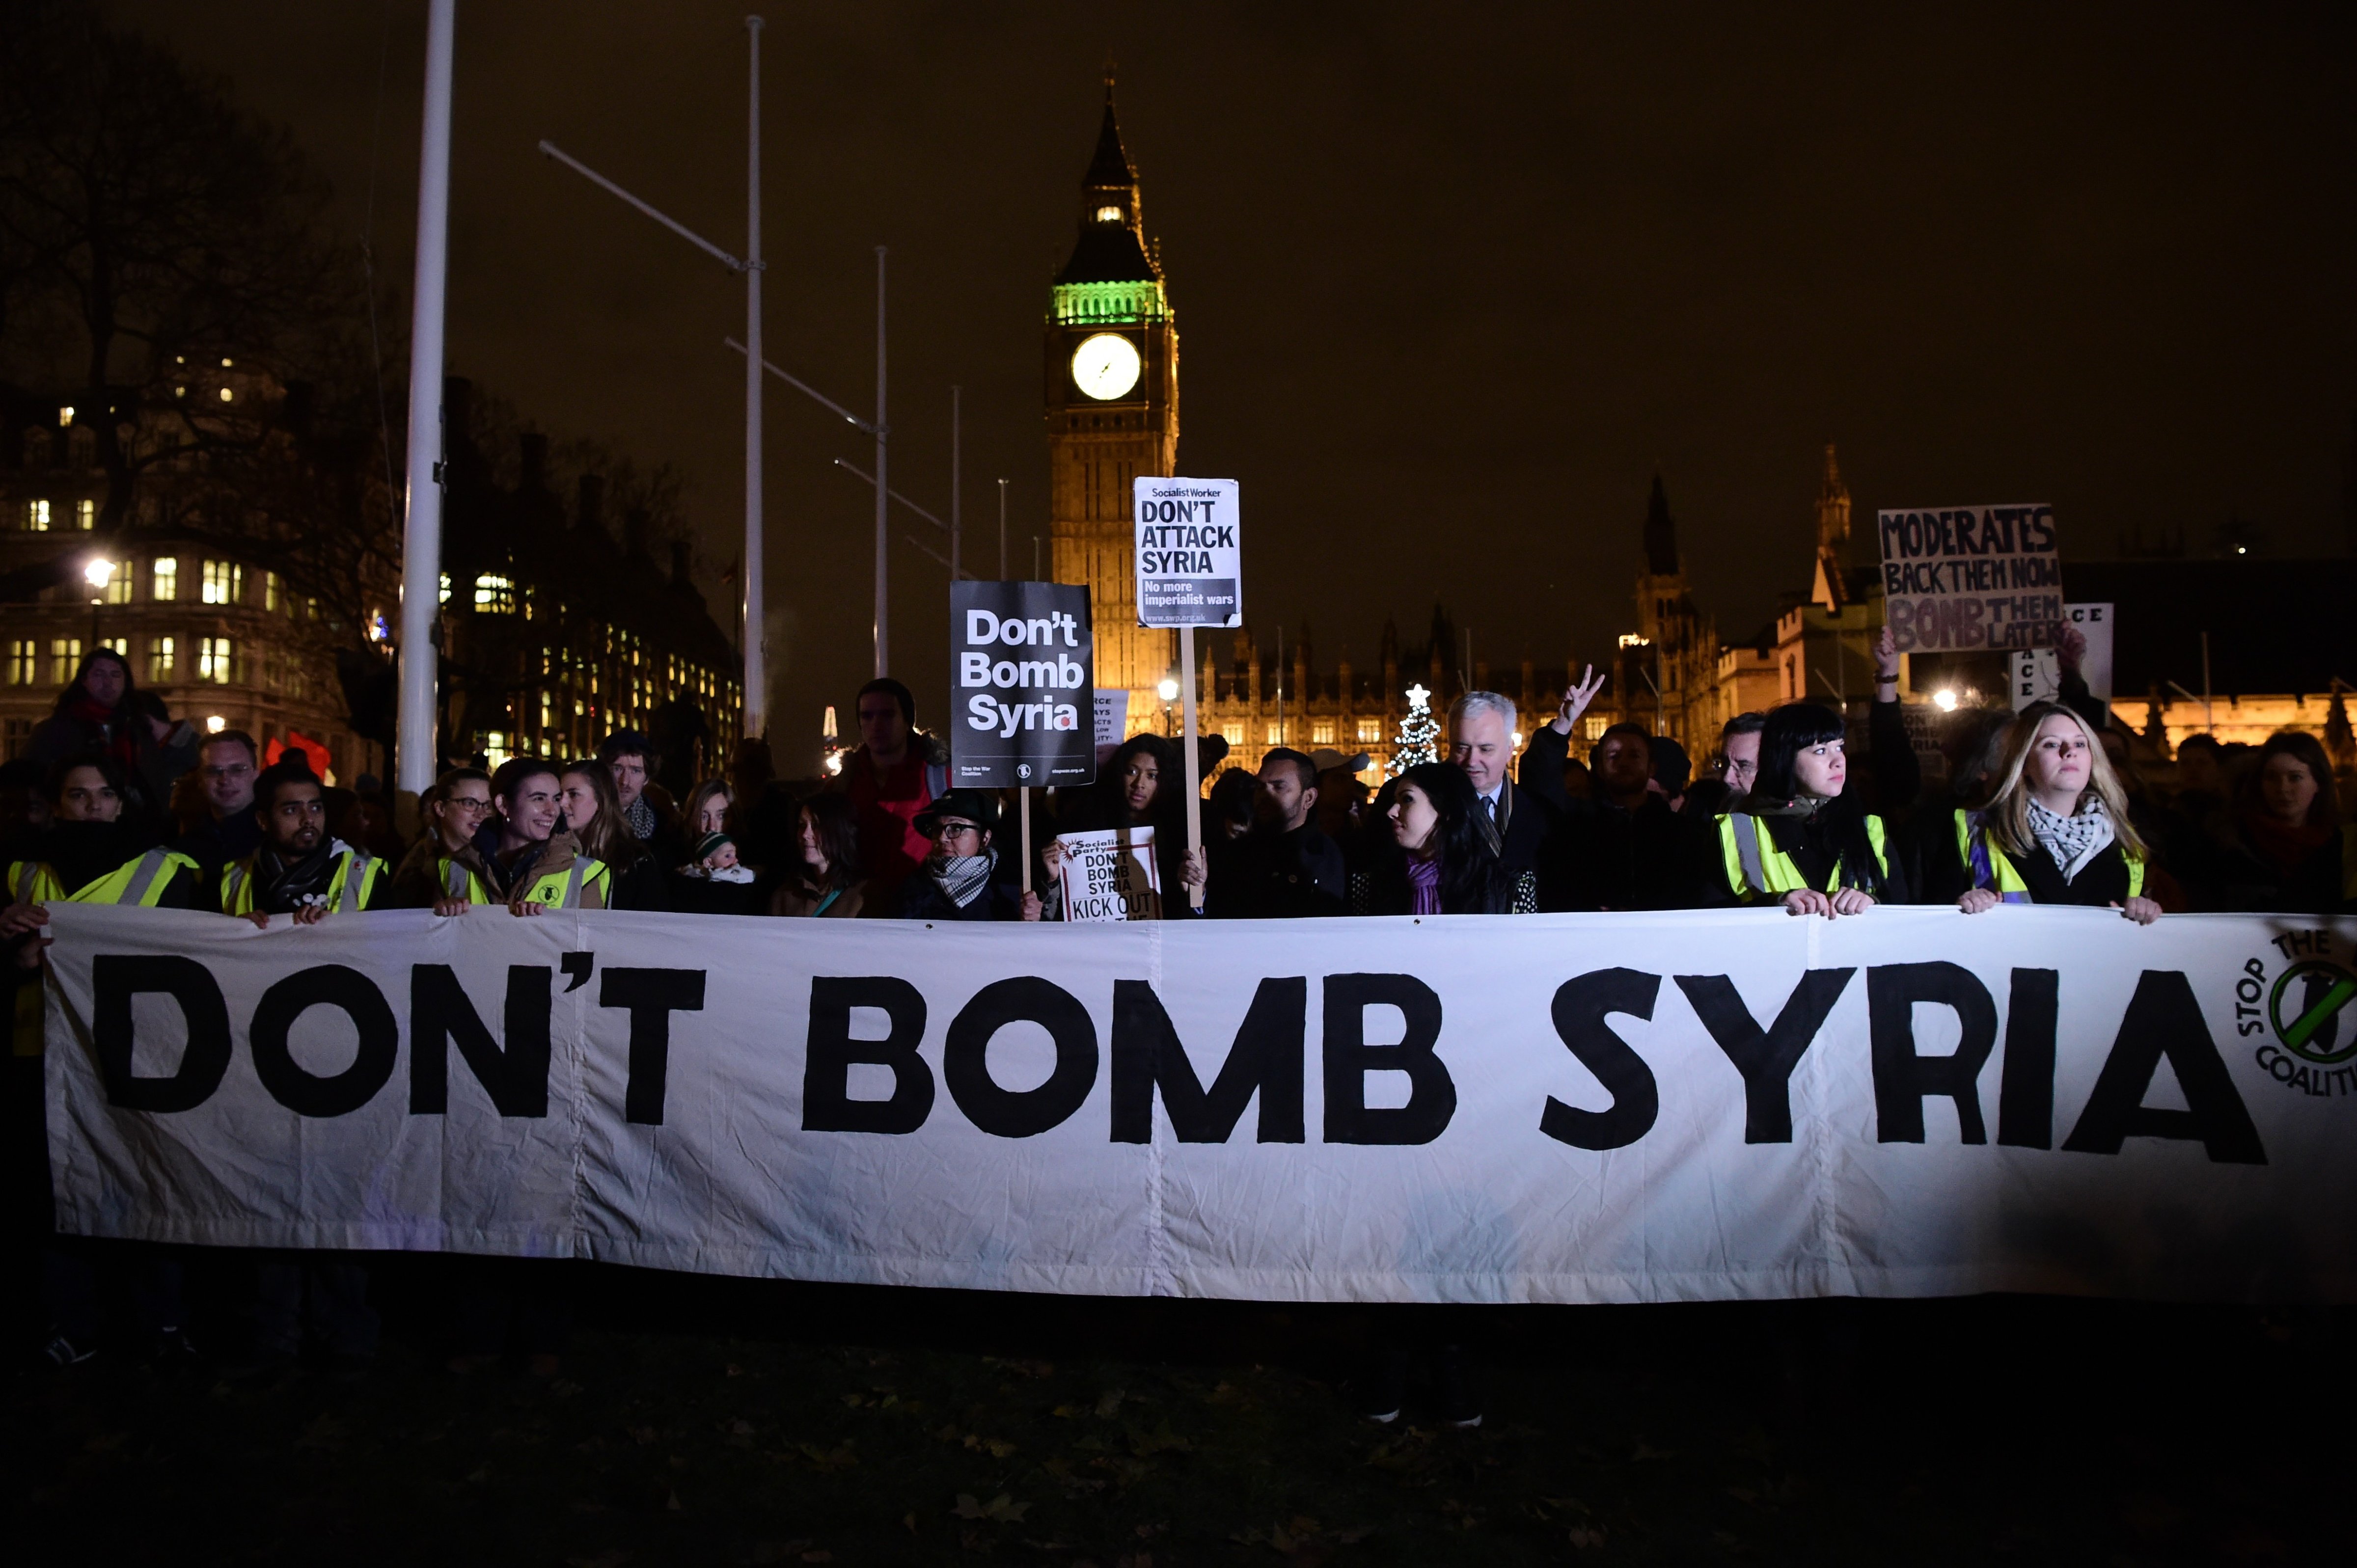 Protesters stand behind a banner that reads "Don't Bomb Syria" during a demonstration against British military action in Syria outside the Houses of Parliament in London on Dec. 1, 2015 (Leon Neal—AFP/Getty Images)